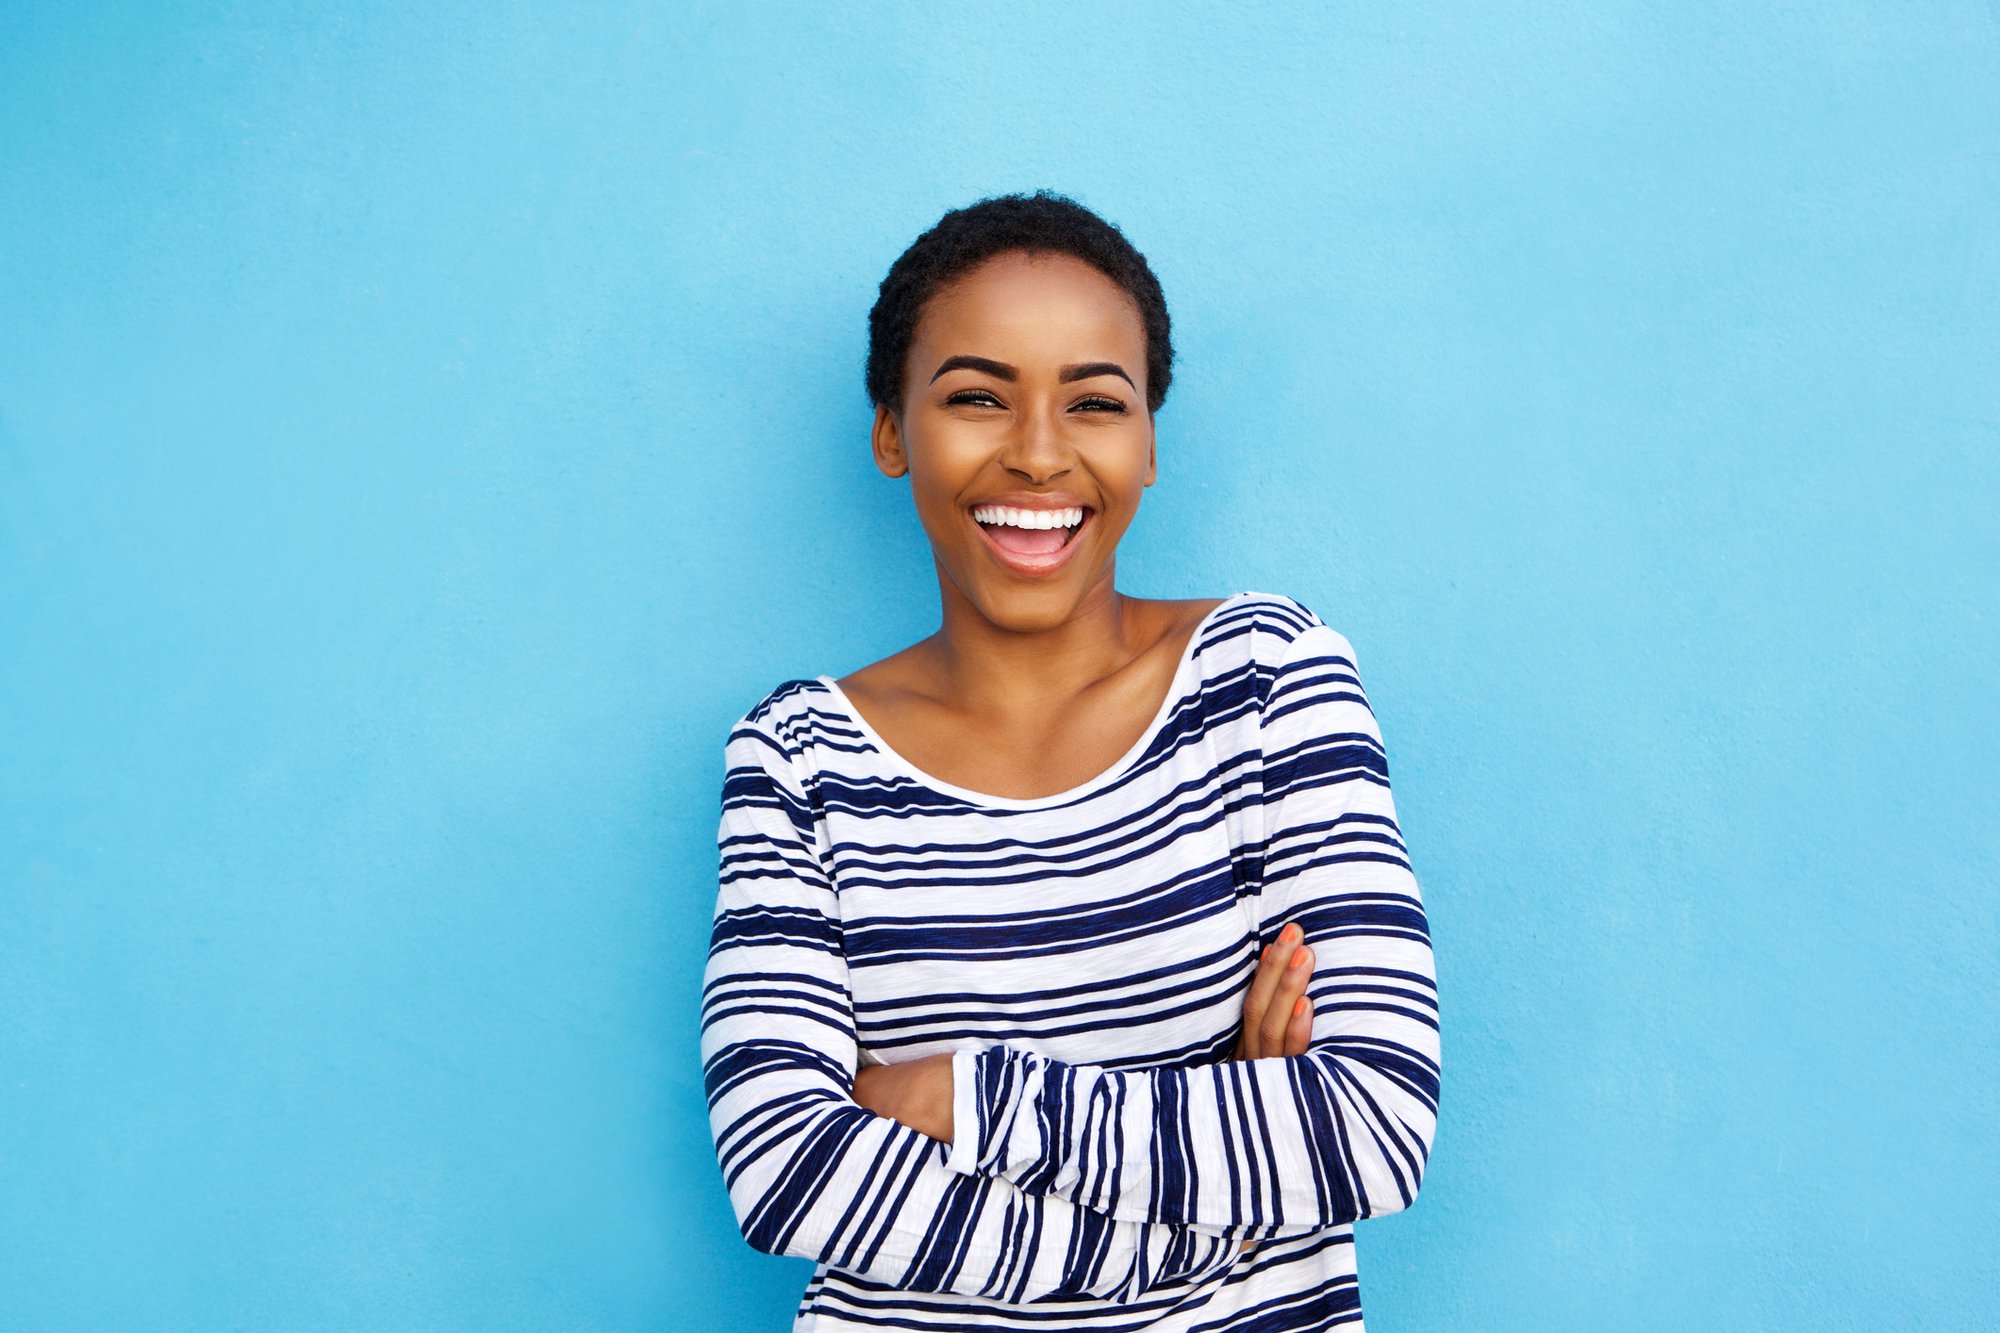 Portrait of happy young black woman laughing against blue wall